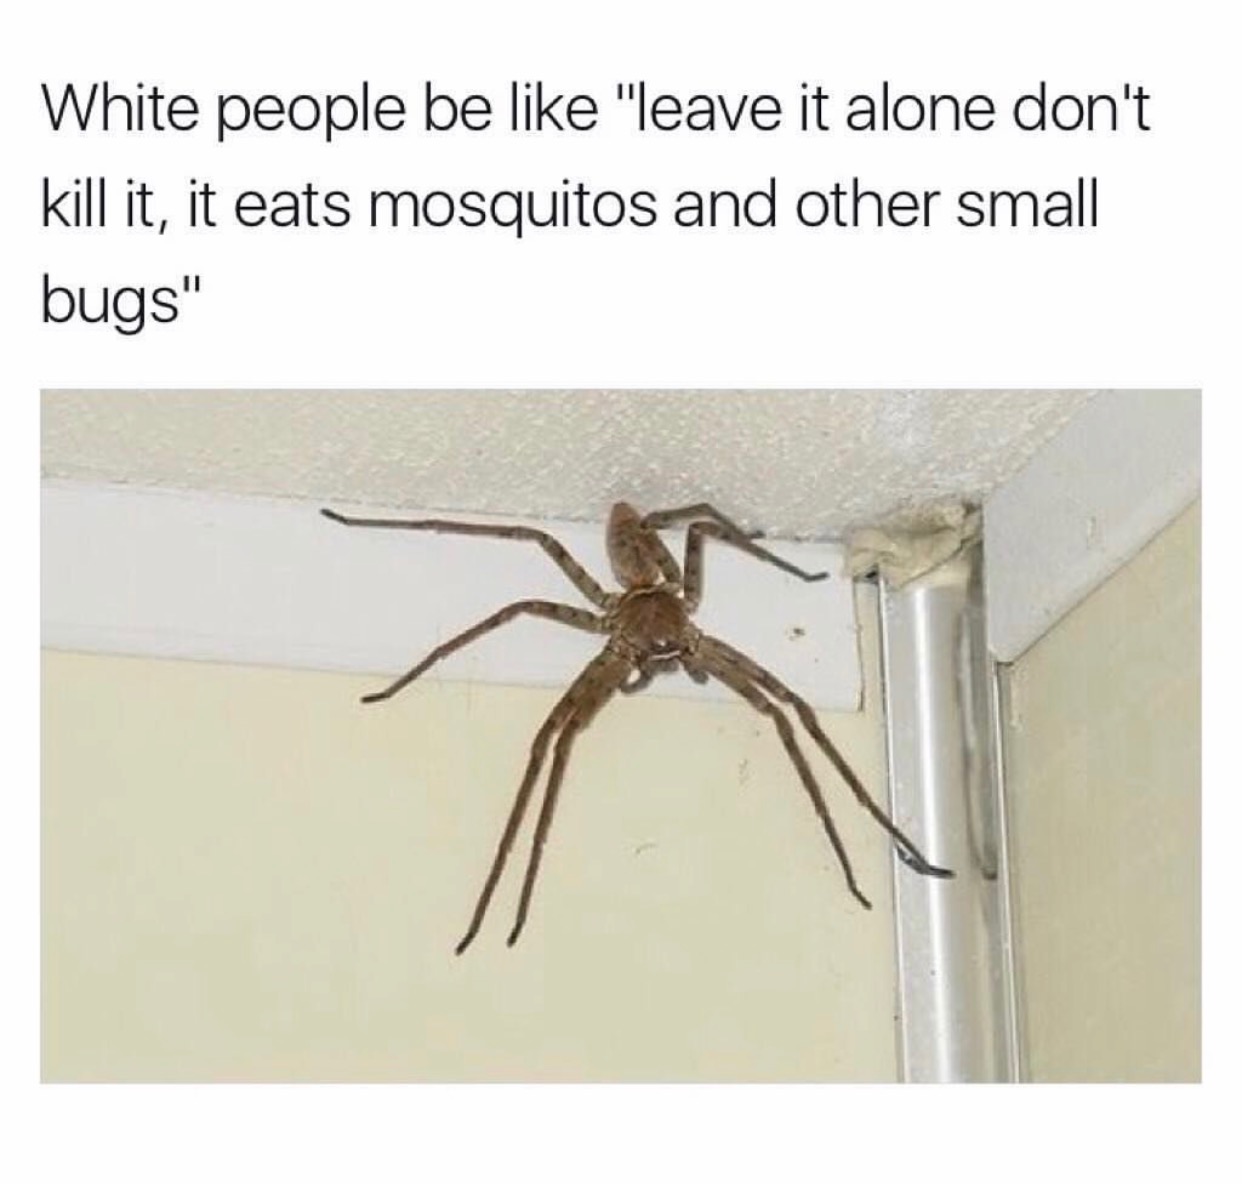 memes - giant huntsman spider - White people be "leave it alone don't kill it, it eats mosquitos and other small bugs"